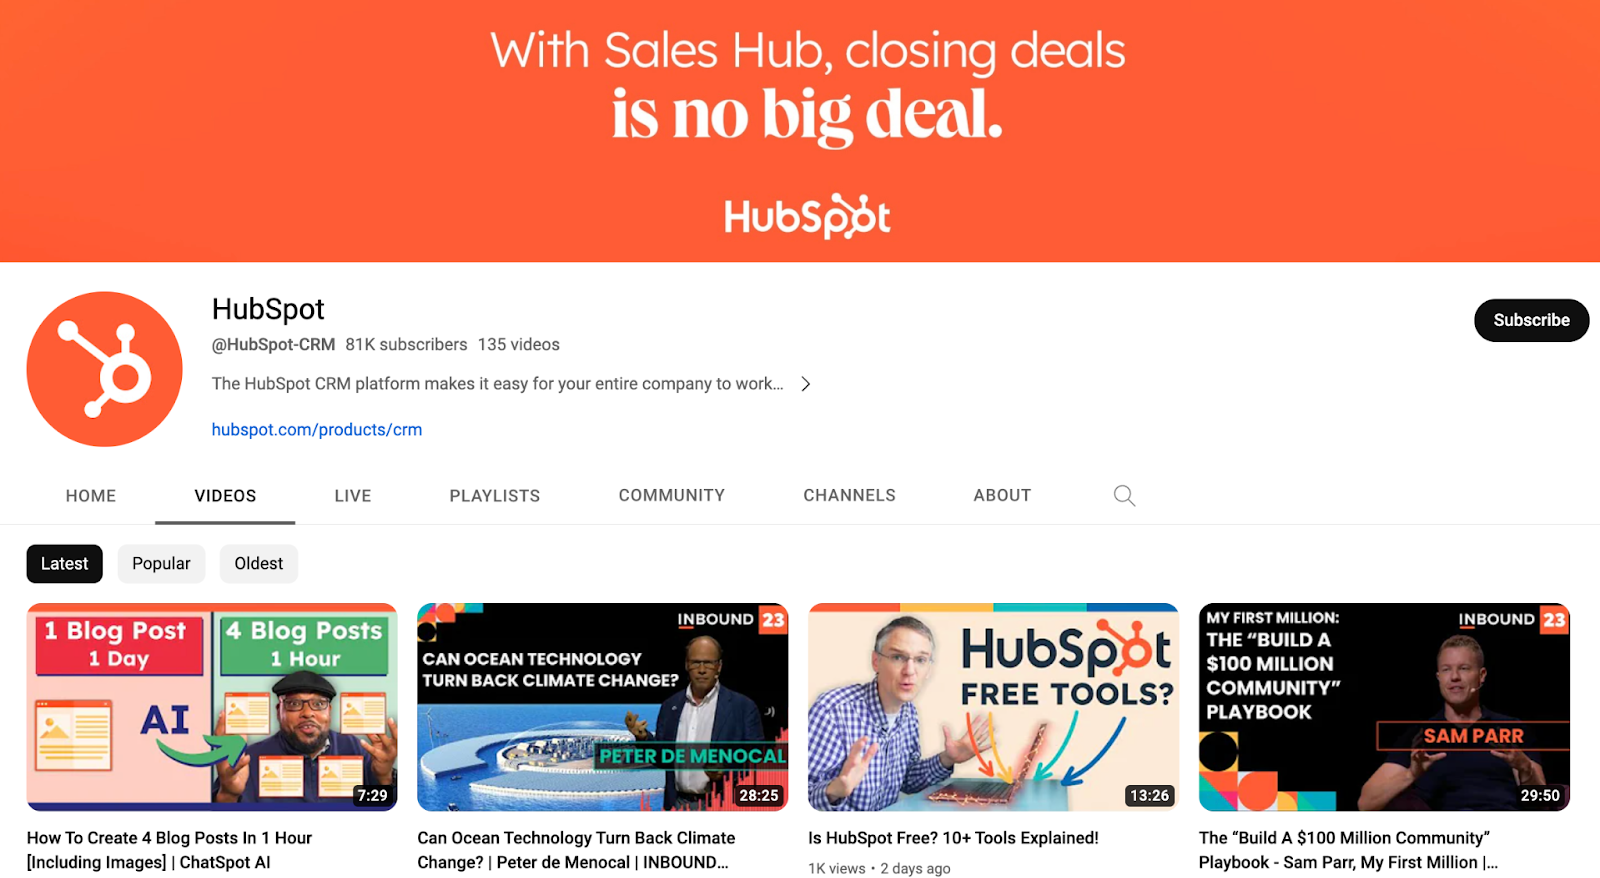 marketing types, HubSpot YouTube channel